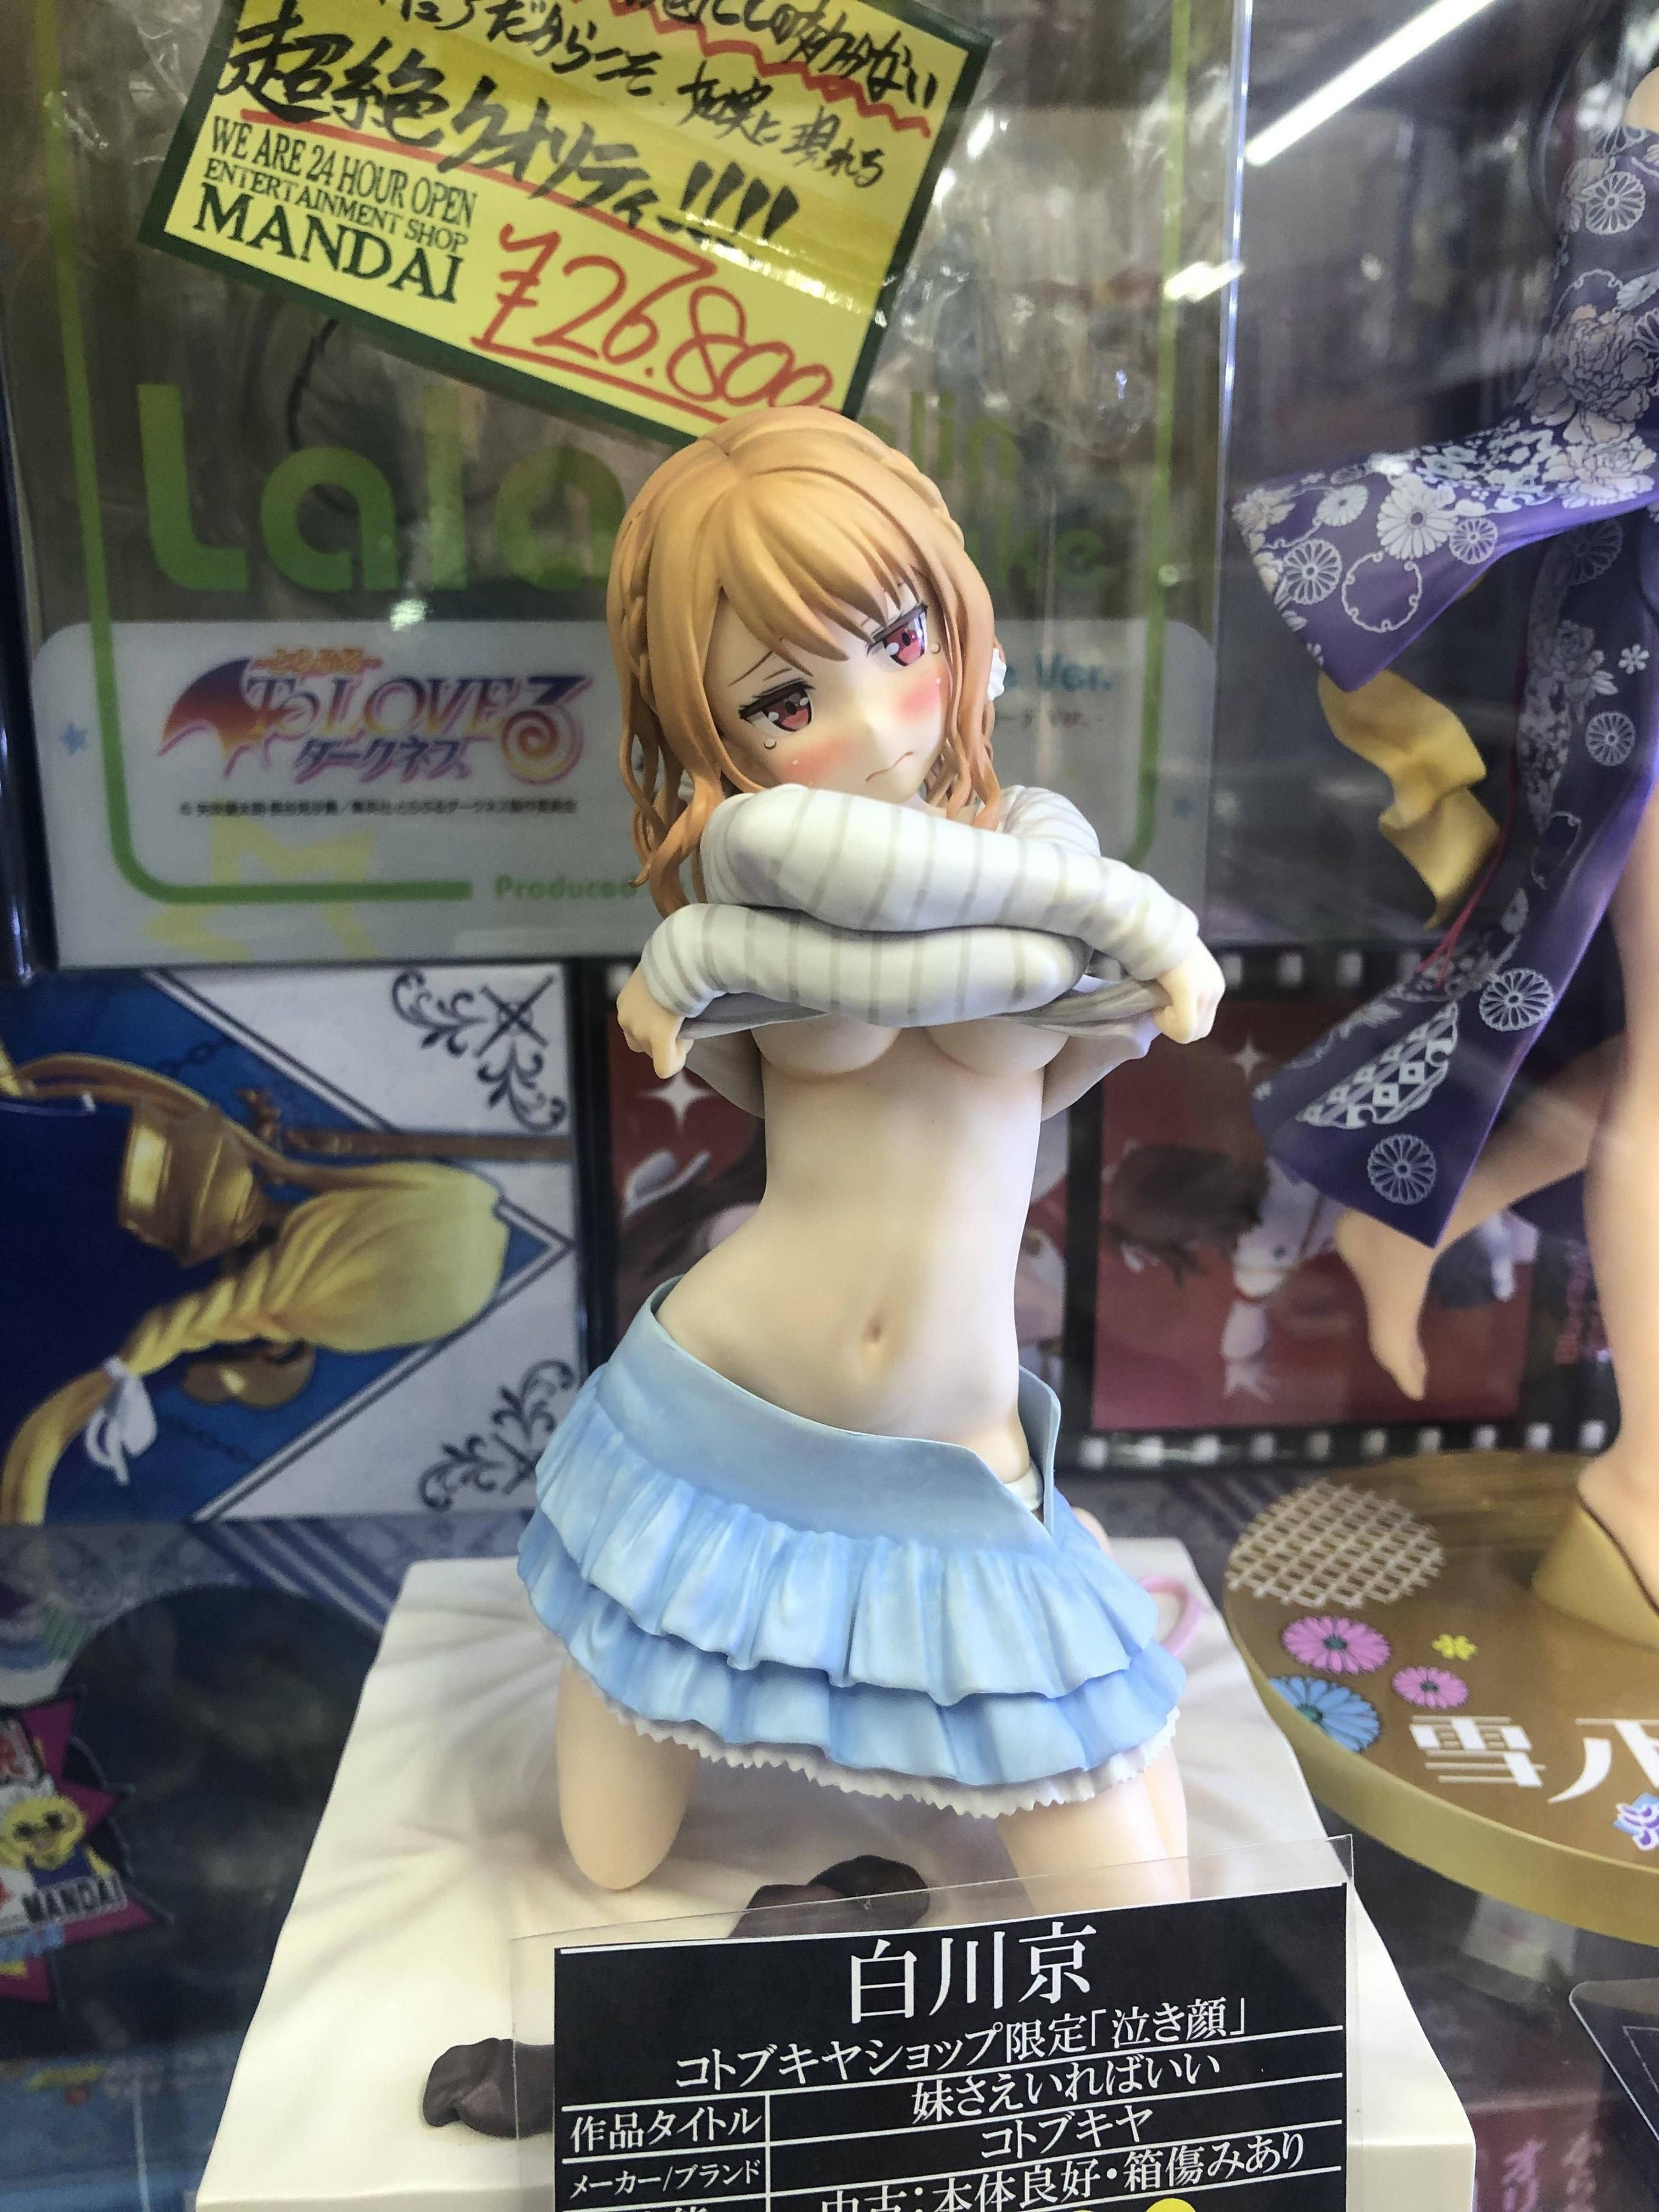 【Image】I was selling a naughty figure of Saber 2